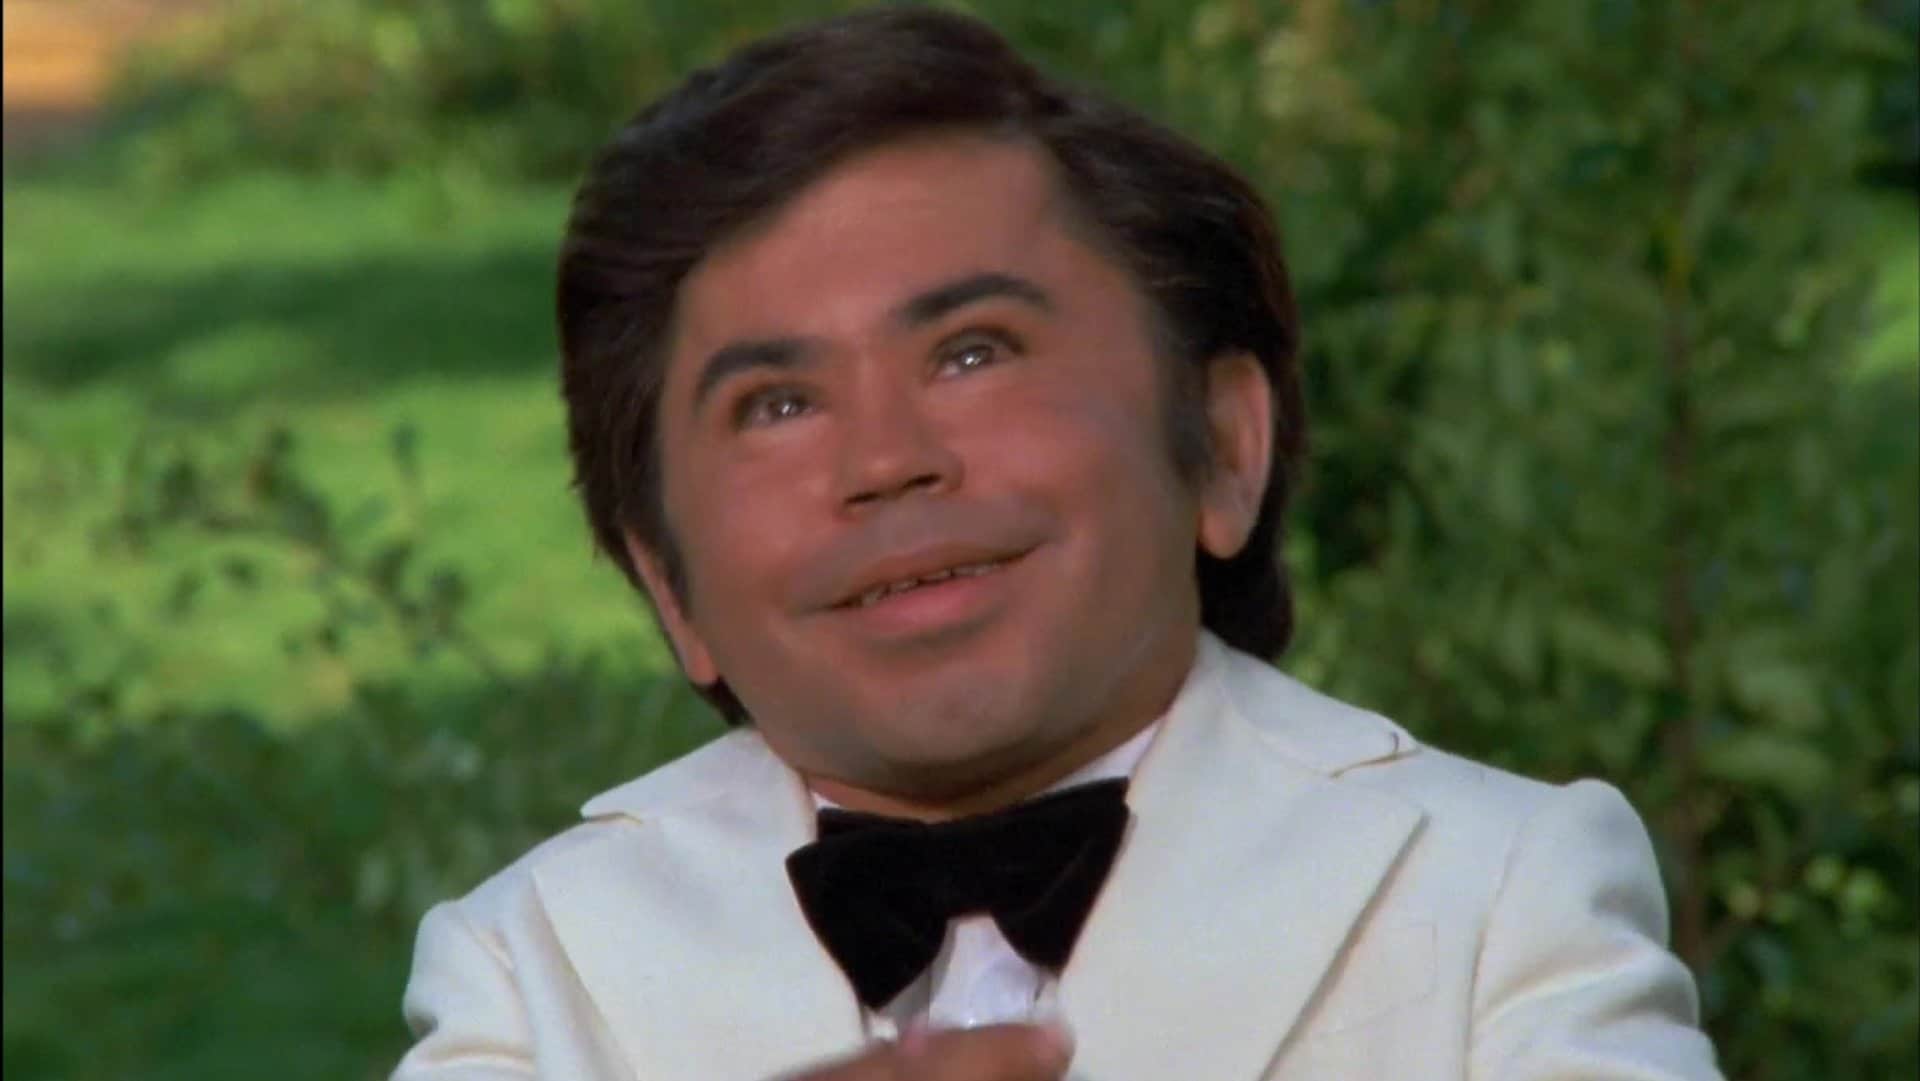 Fantasy Island coming back to TV but will we see Mr Roarke and Tattoo   Mirror Online